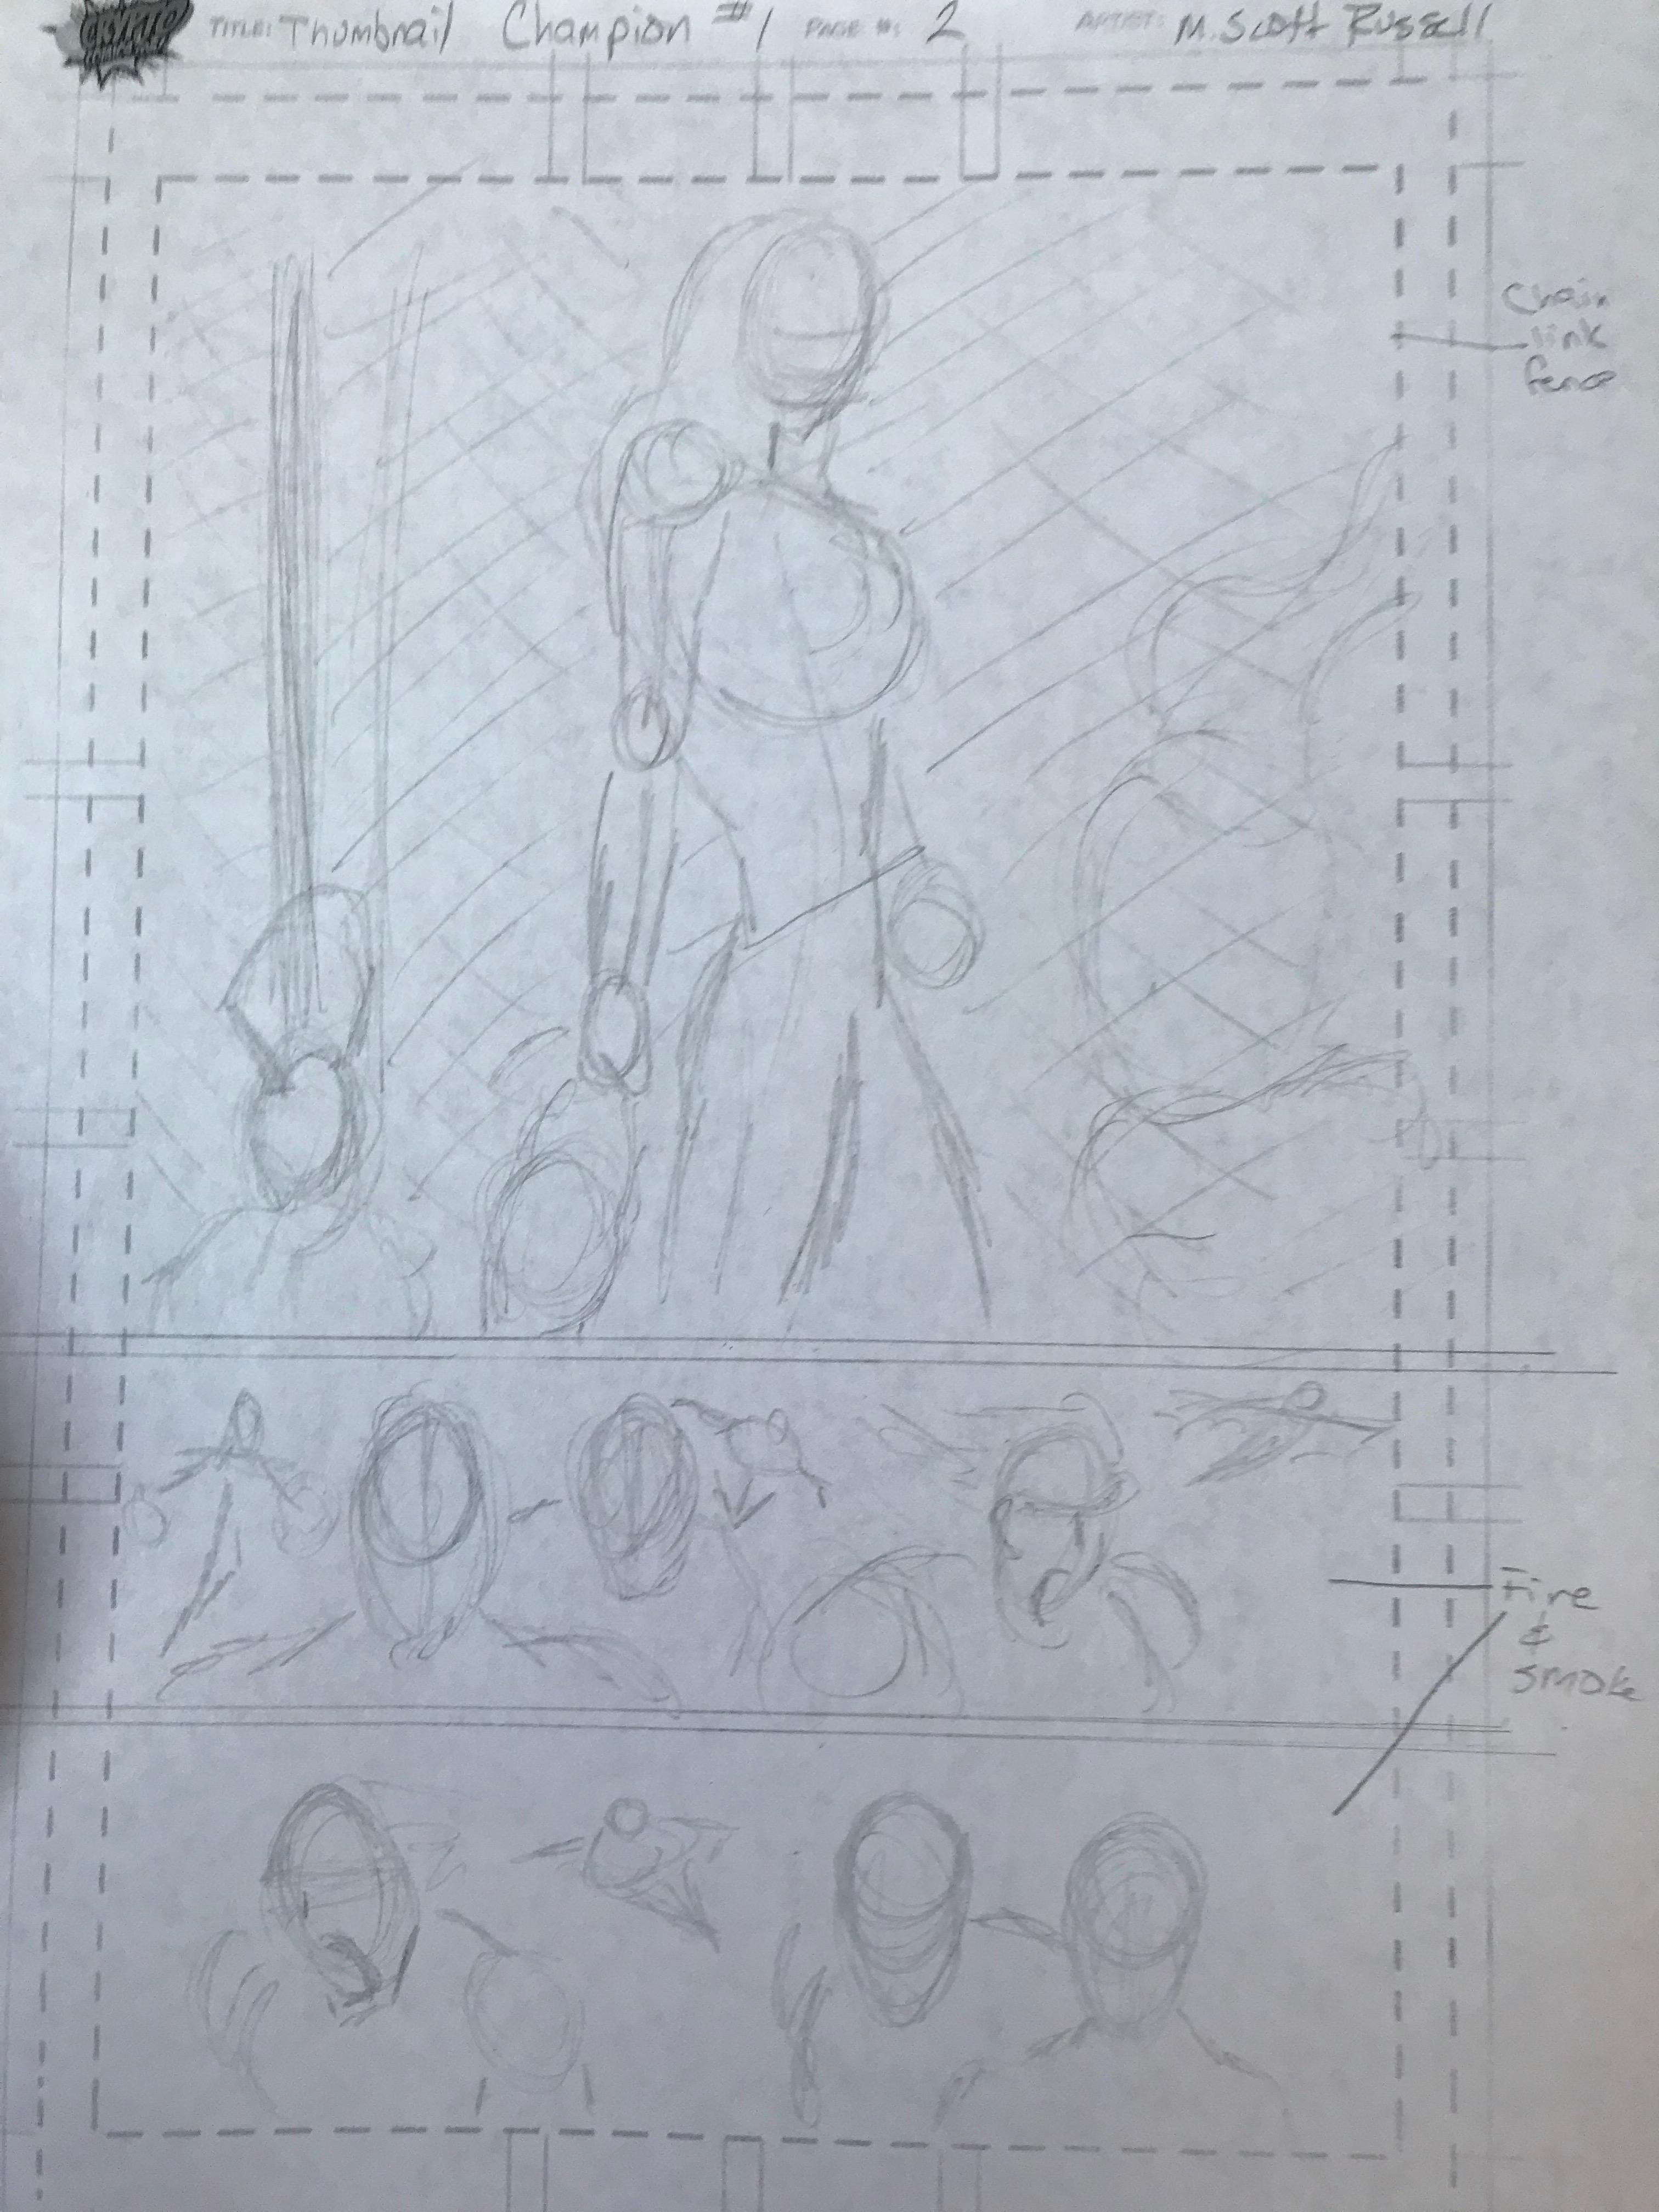 Champion Issue 1 page 2 layout thumbnail